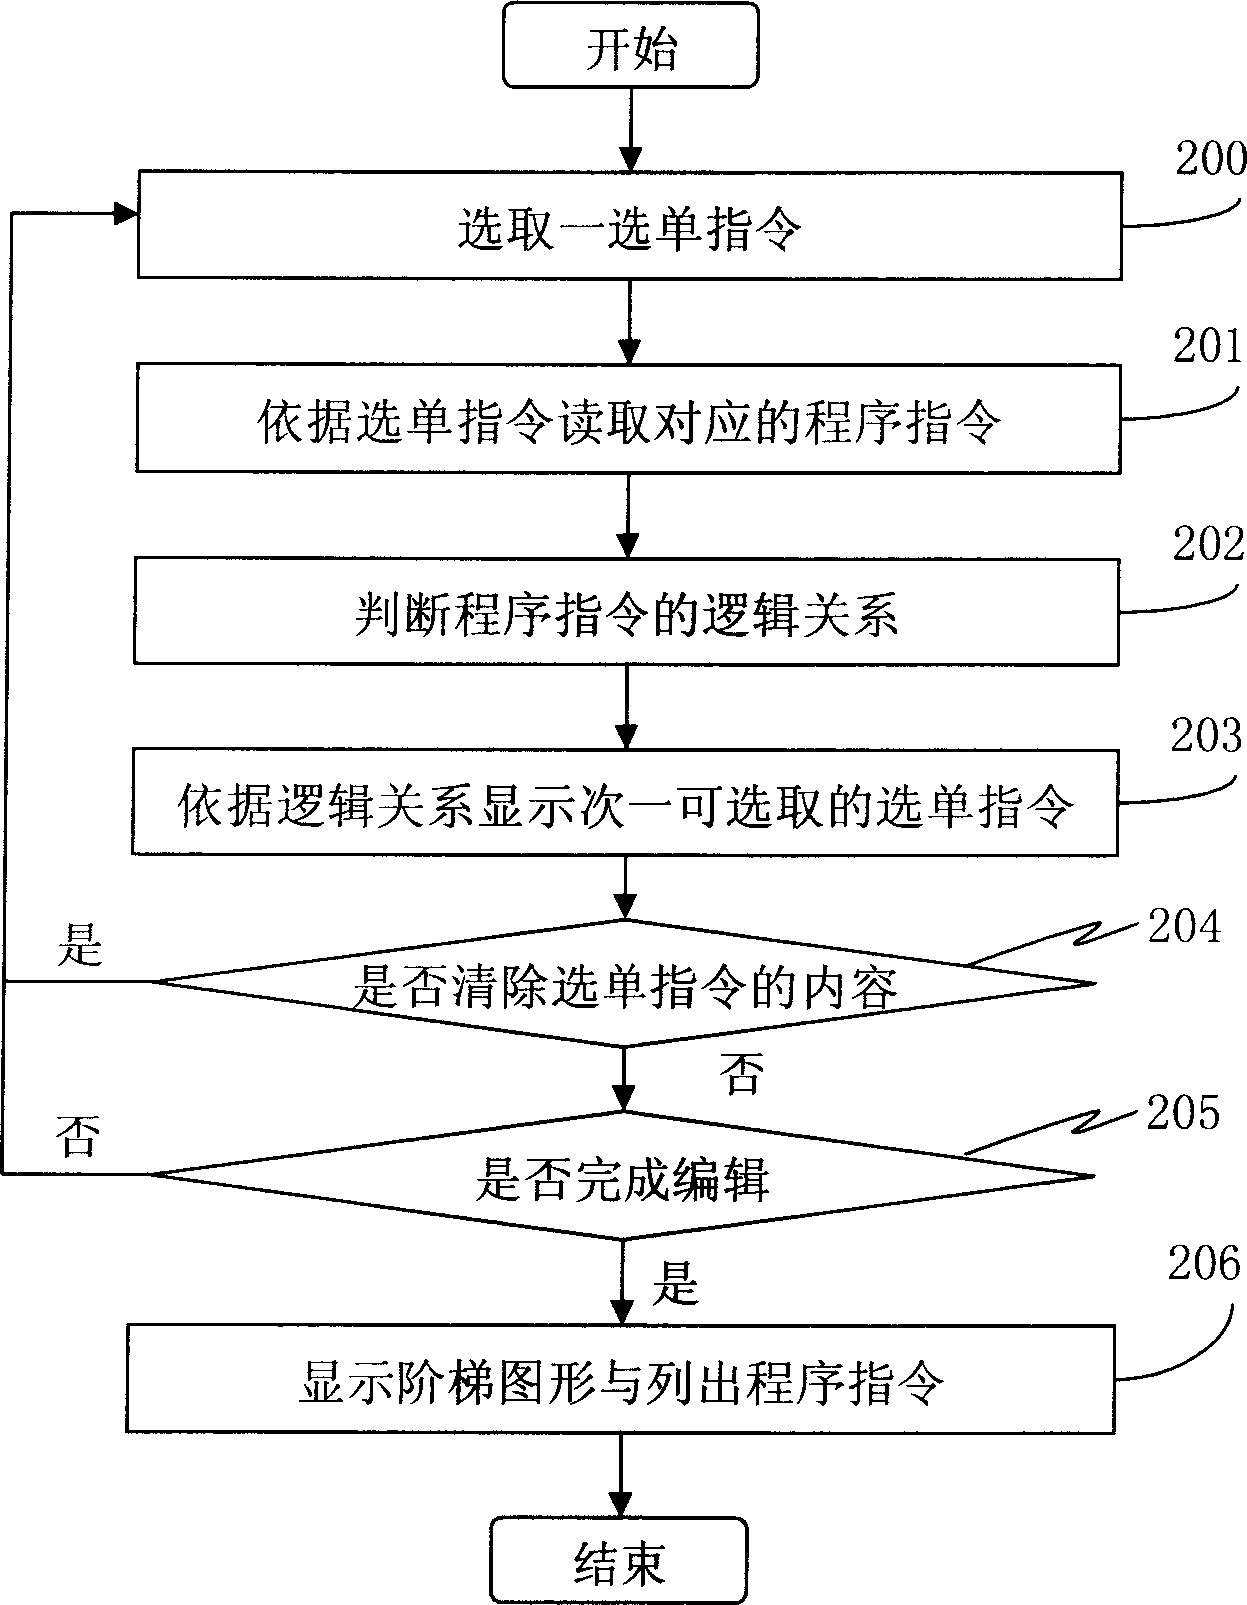 Program editing system and method for programmeable logic controller